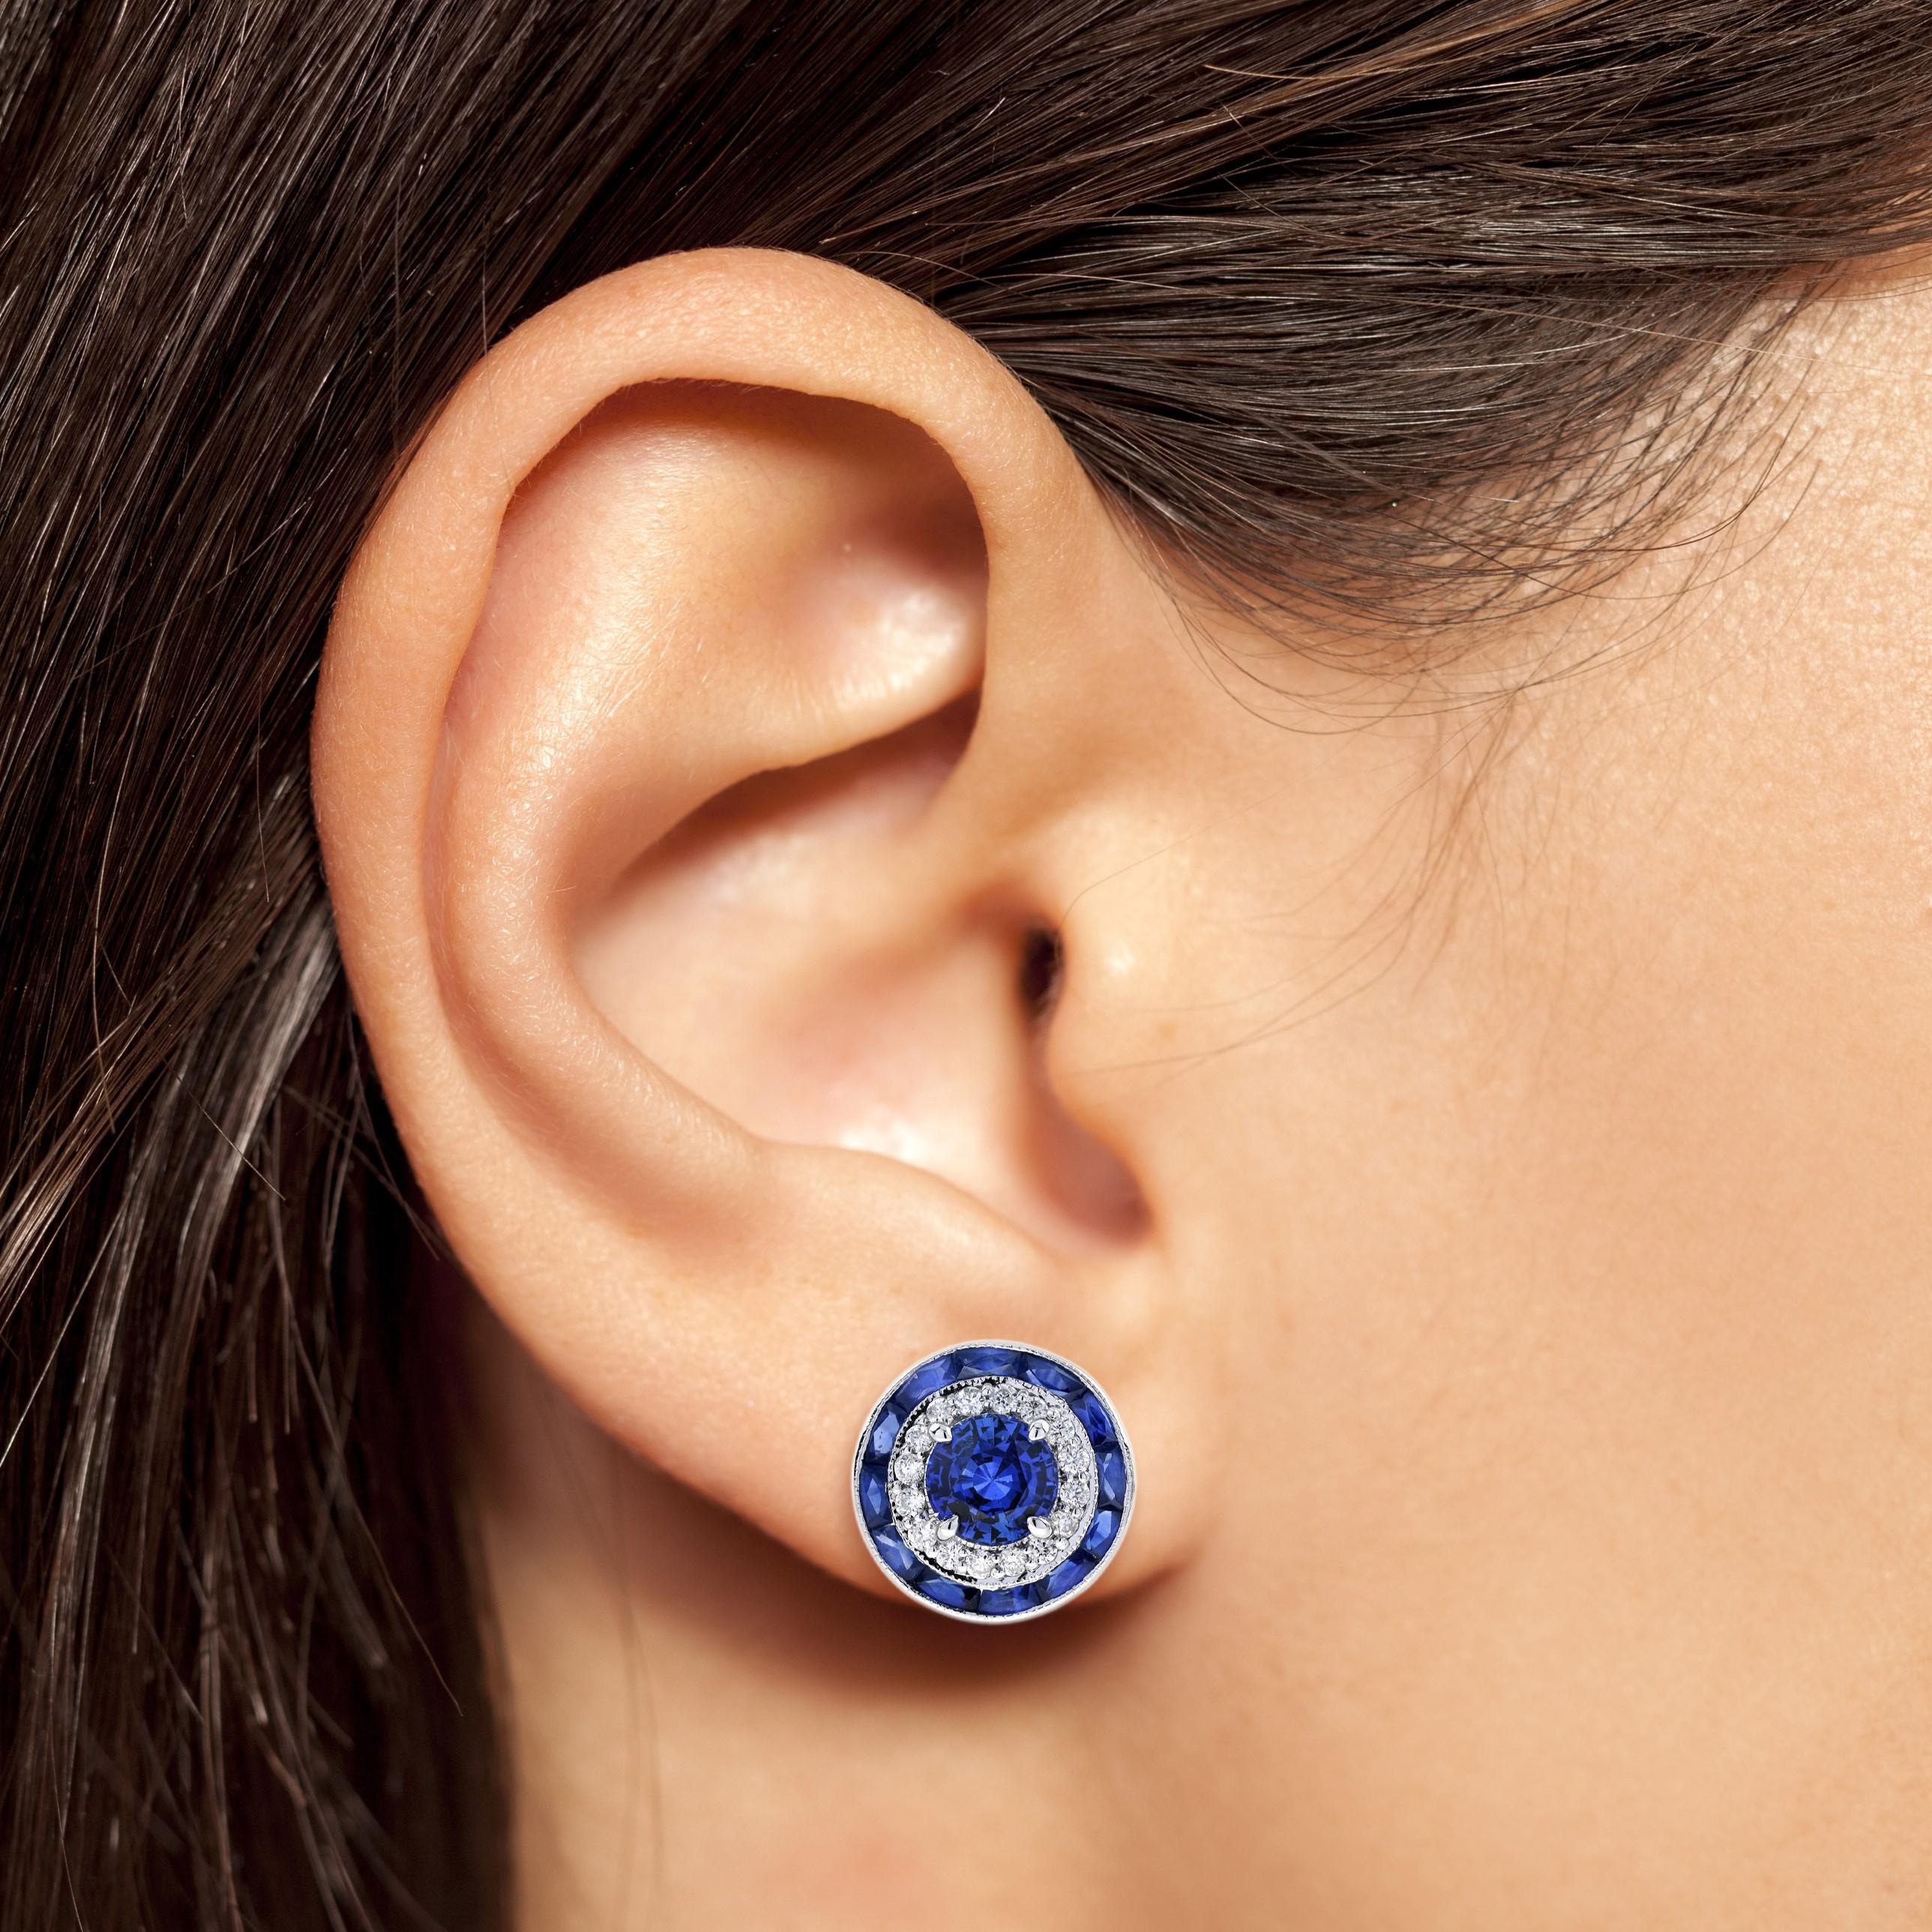 So versatile and easy to wear, these stud earrings are the perfect choice for adding some understand pizazz to your lobes. The center 5 mm., weighting 0.75 carat (each) Ceylon sapphire in this chic Deco style earrings, are surrounded by glittering